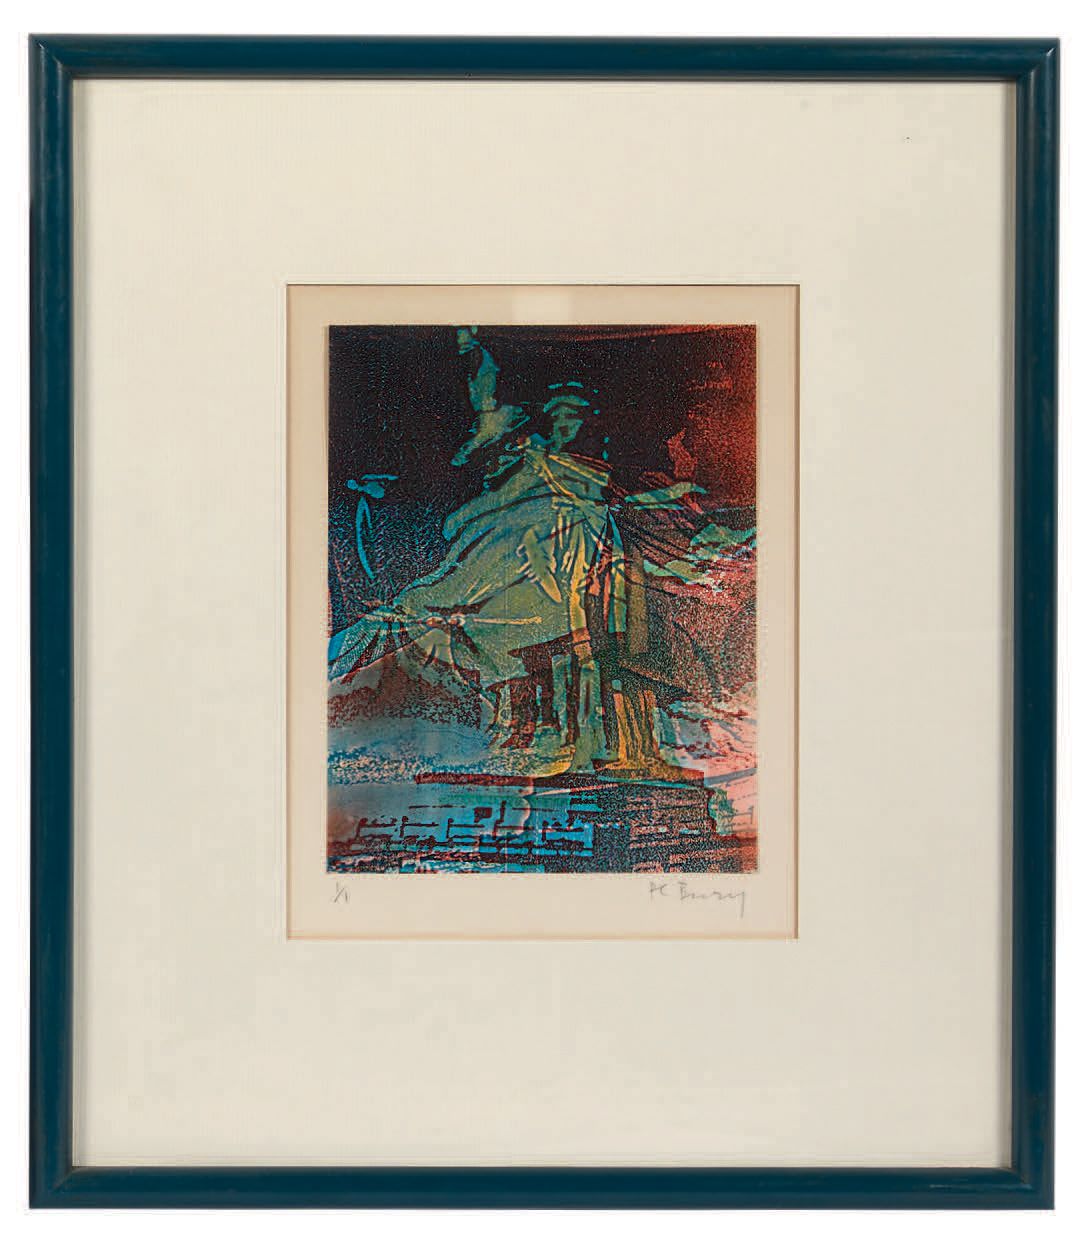 POL BURY (1922-2005) Statue of Liberty
Lithograph in colors, numbered 1/1 and si&hellip;